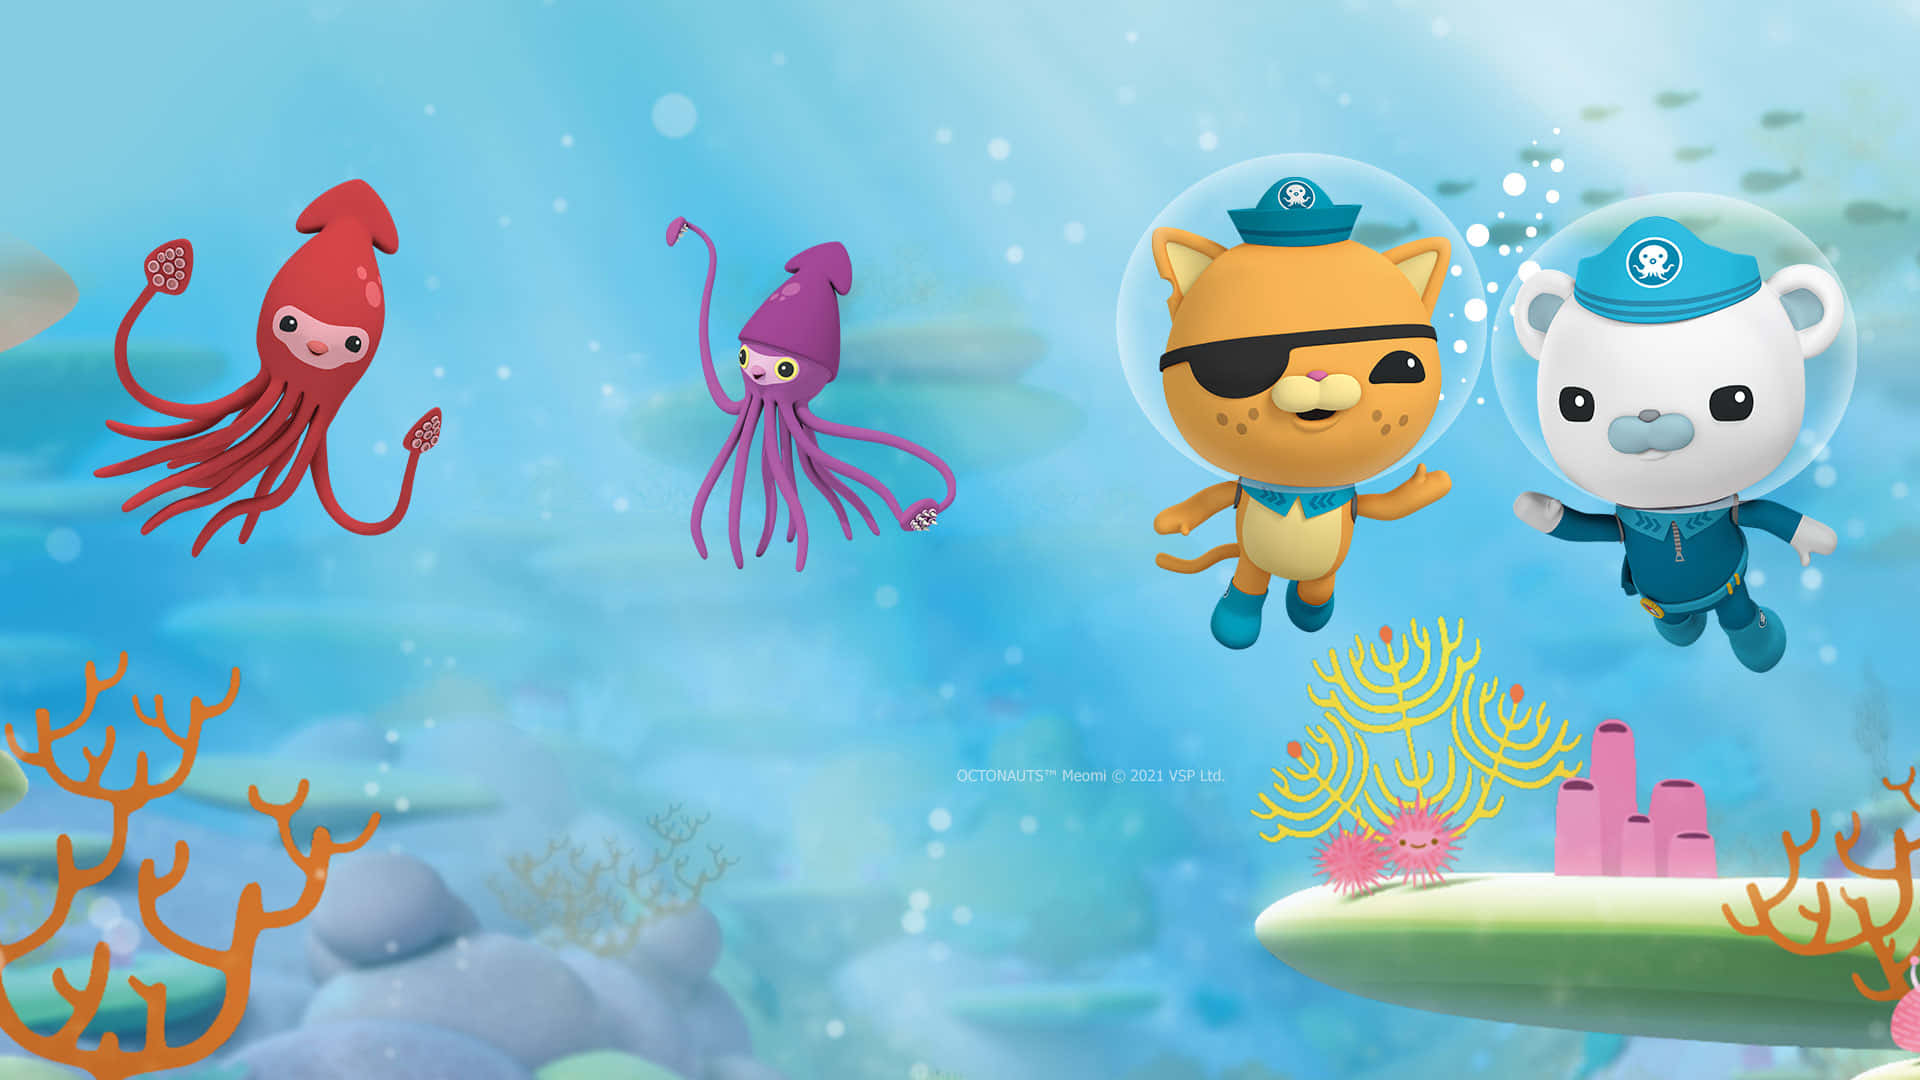 Join Captain Barnacles and the crew of the Octonauts on their high-seas adventures! Wallpaper